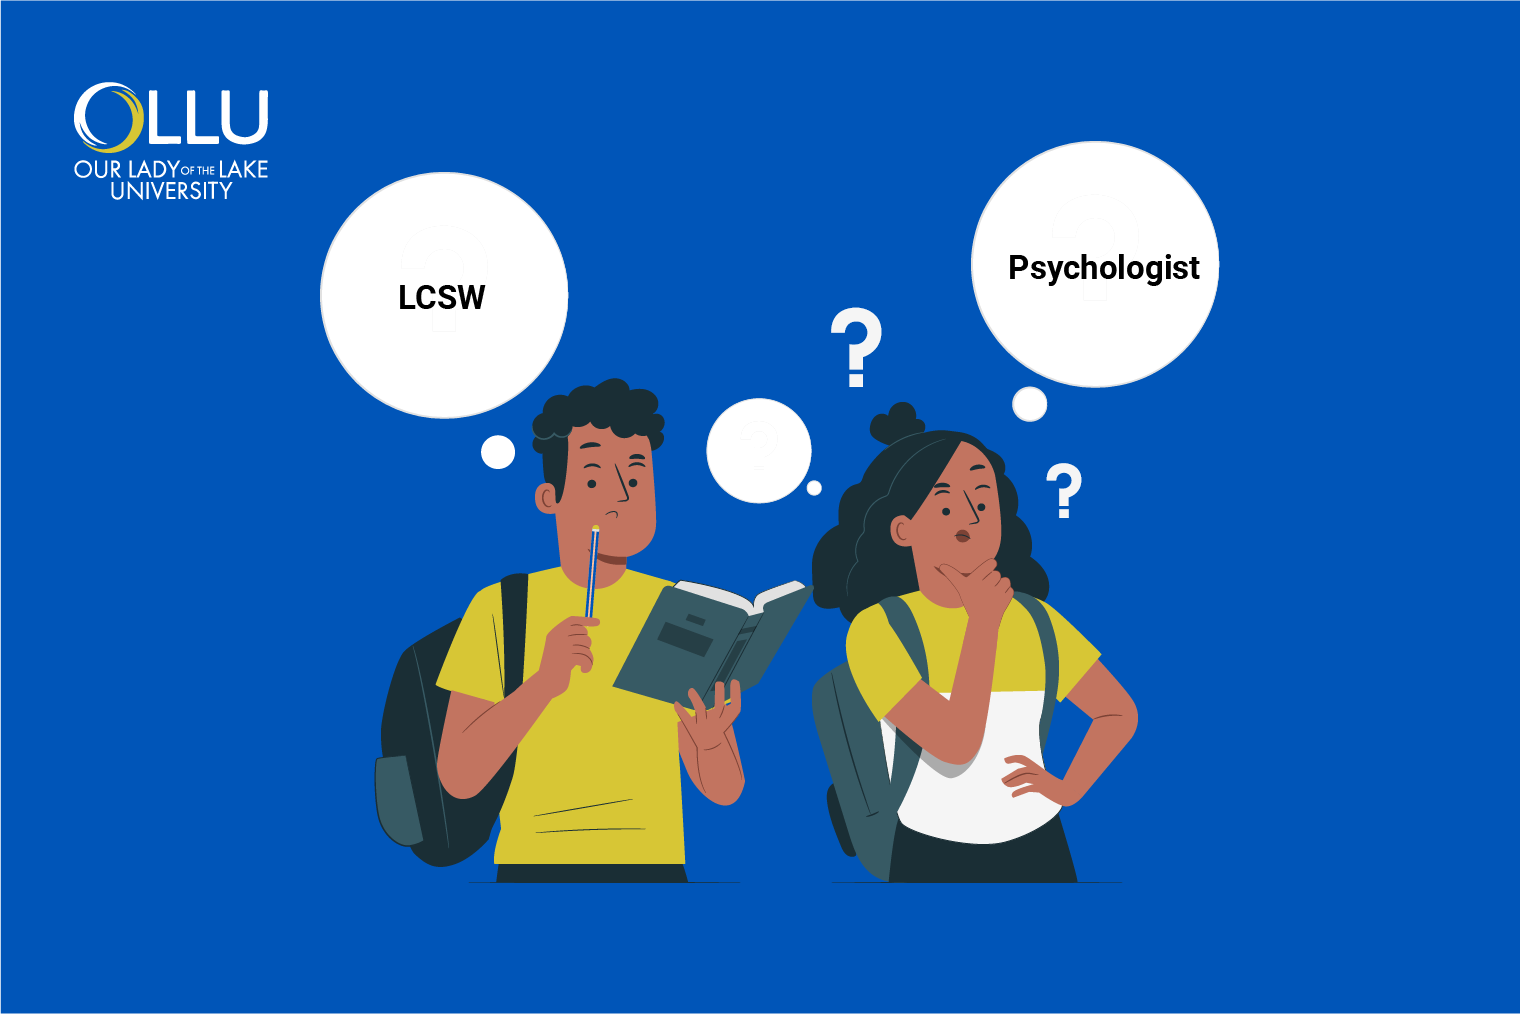 lcsw-vs-psychologist-which-one-should-i-choose